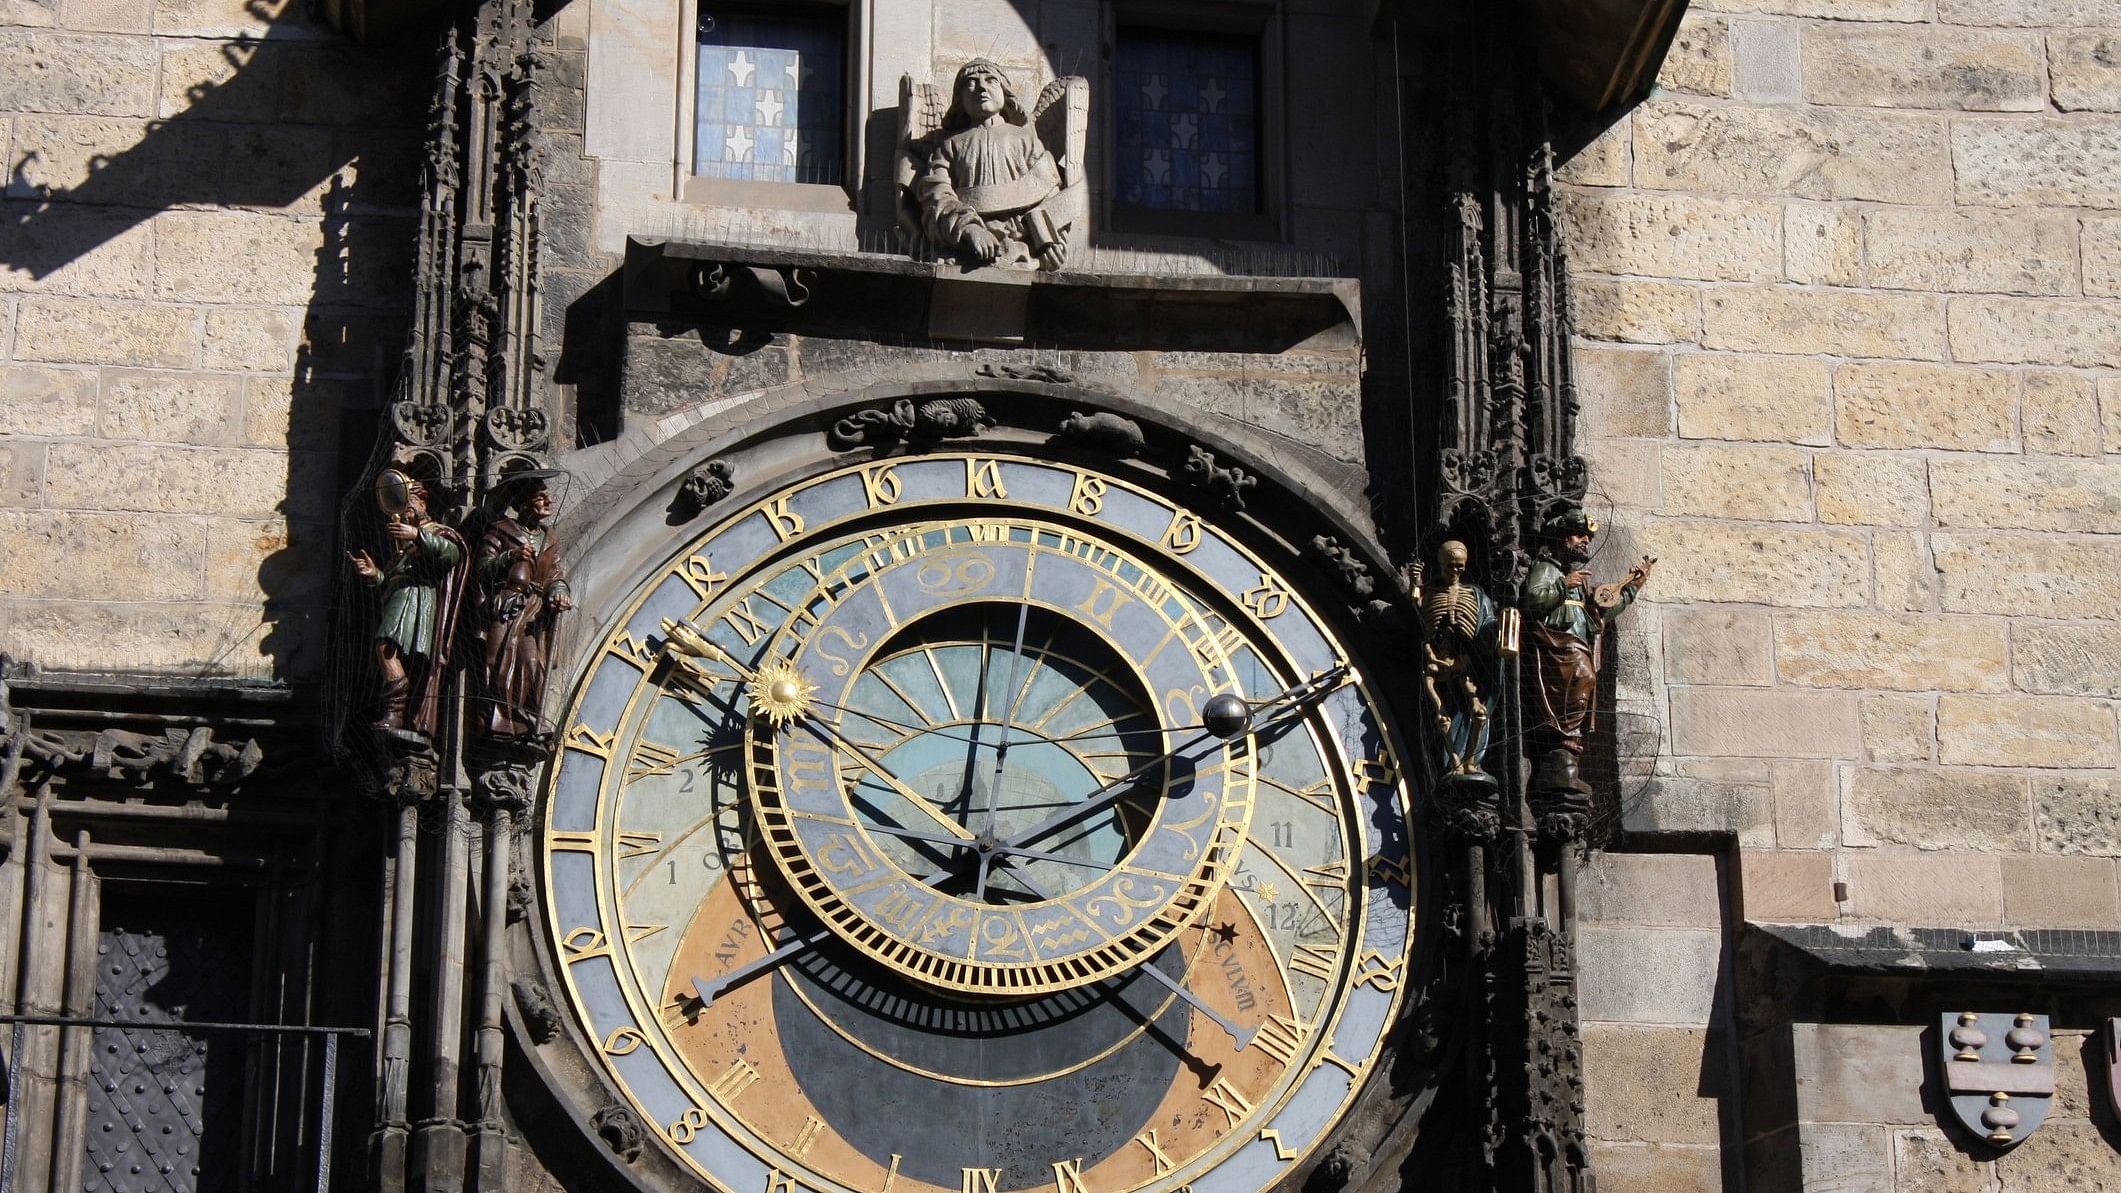 Famous Prague astronomical clock, the old Atomic clock in the Czech capital.